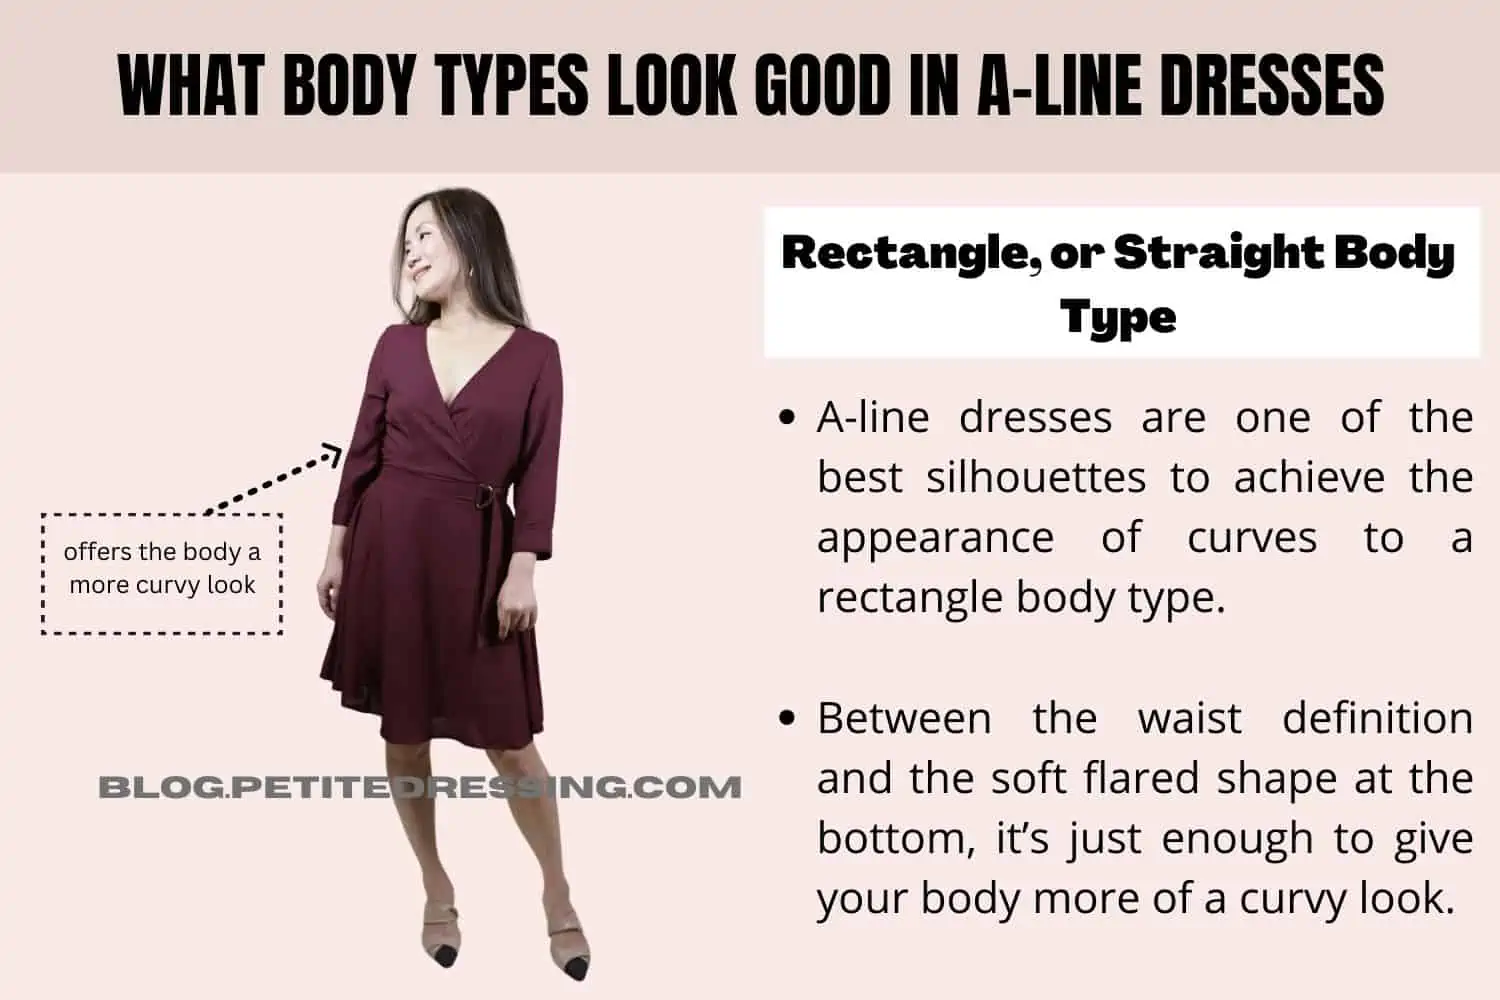 Are A-line Dresses Slimming?